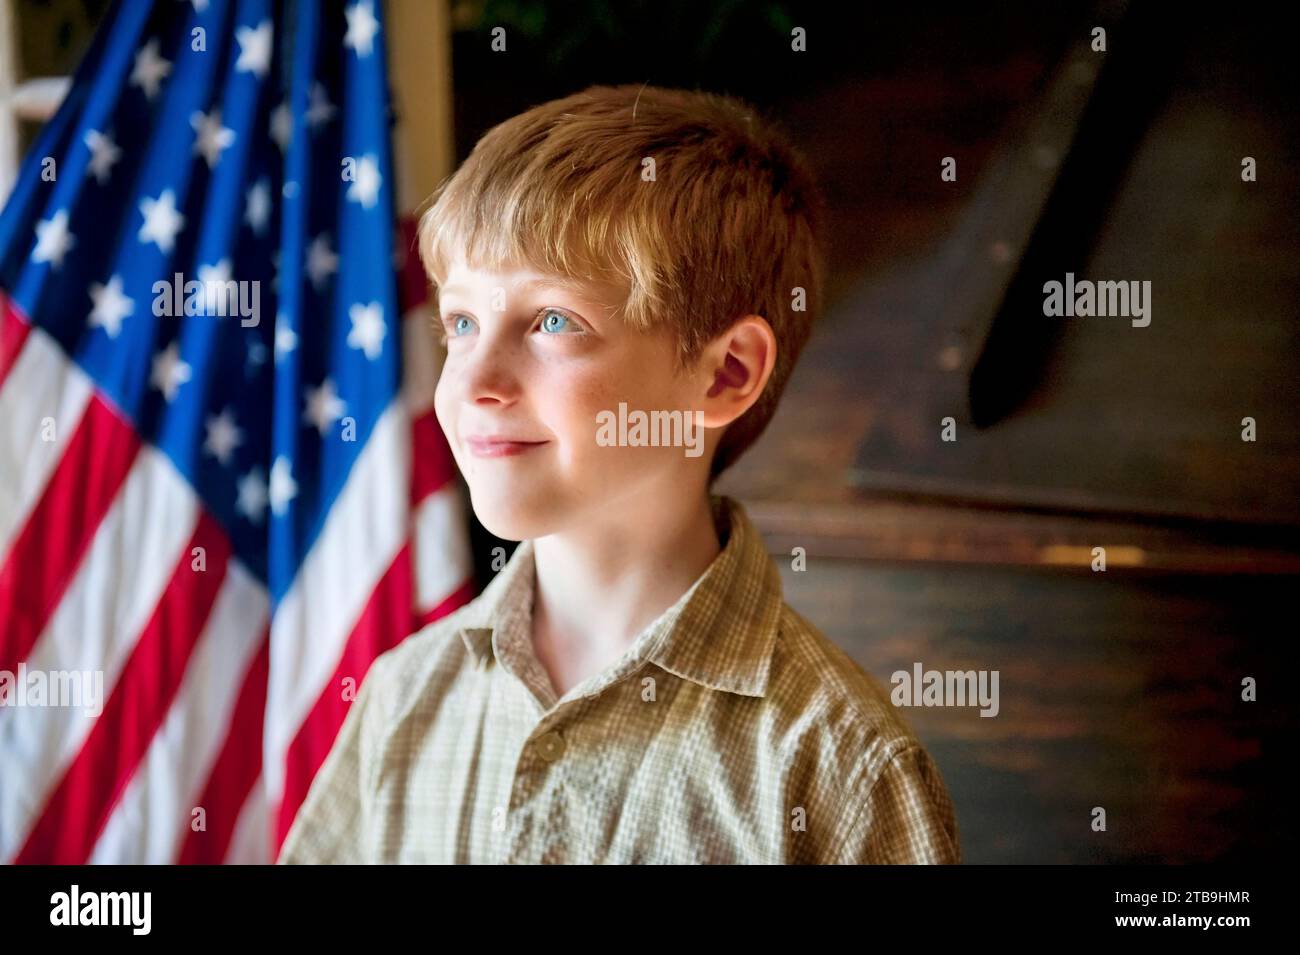 Young, patriotic boy stands before the American flag; Lincoln, Nebraska, United States of America Stock Photo